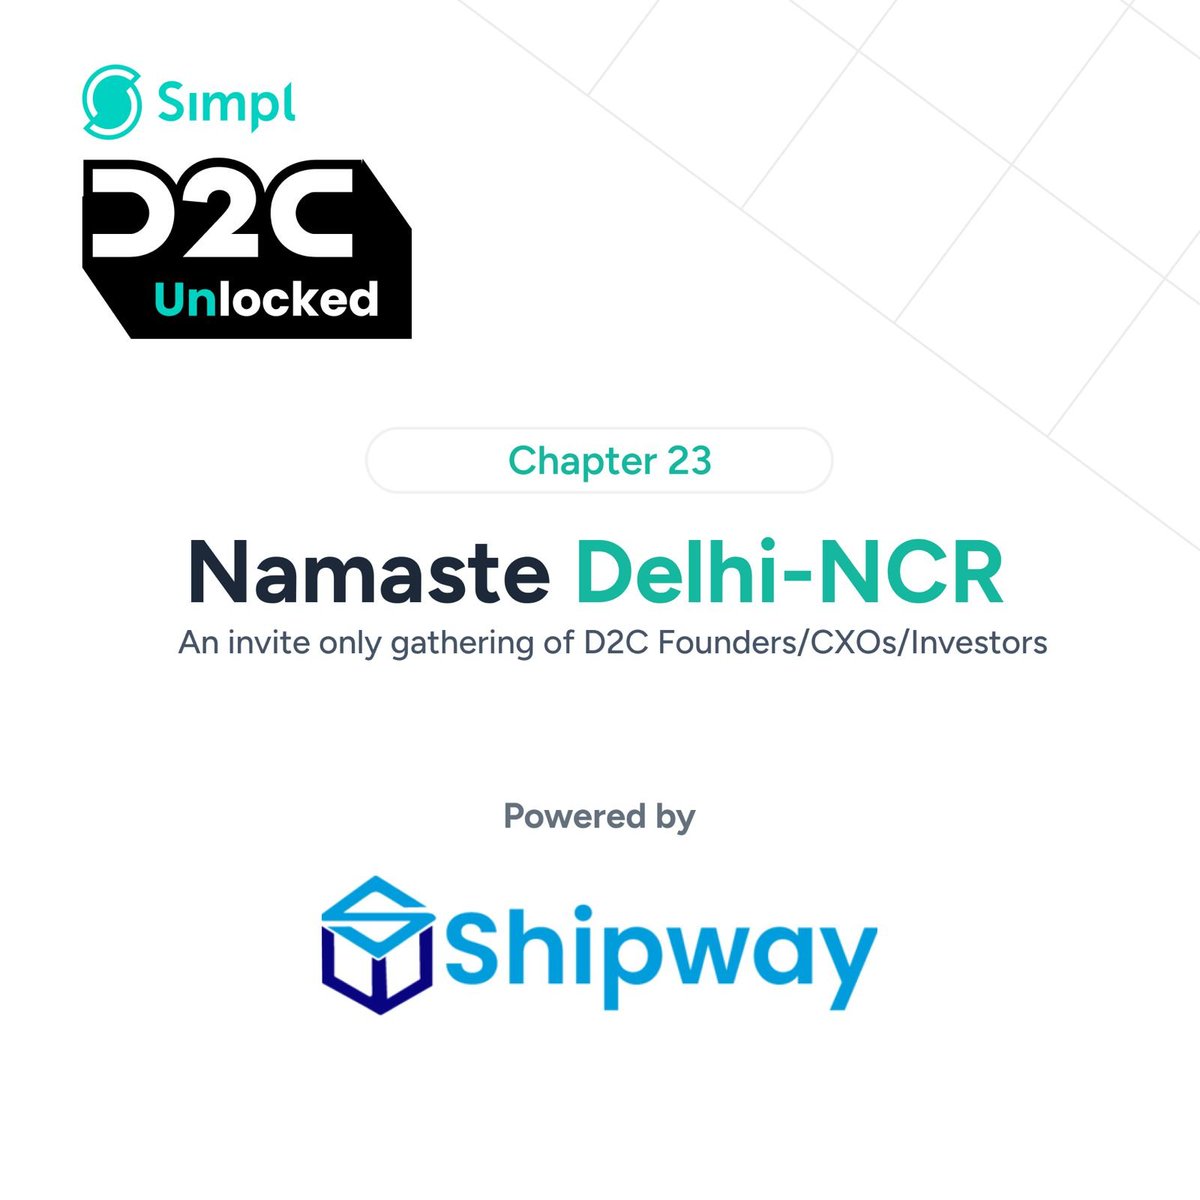 Are you ready Delhi-NCR? 🤩 We are set to join you at @getsimpl D2C Unlocked Delhi-NCR chapter with @AdyogiPlatform and @affinidi 📅Date: 25th April 🕠Time: 6-9 PM 🏨Venue: The Quorum, Gurgaon 👉Register here: docs.google.com/forms/d/e/1FAI… #D2CUnlocked #Networking #Shipway